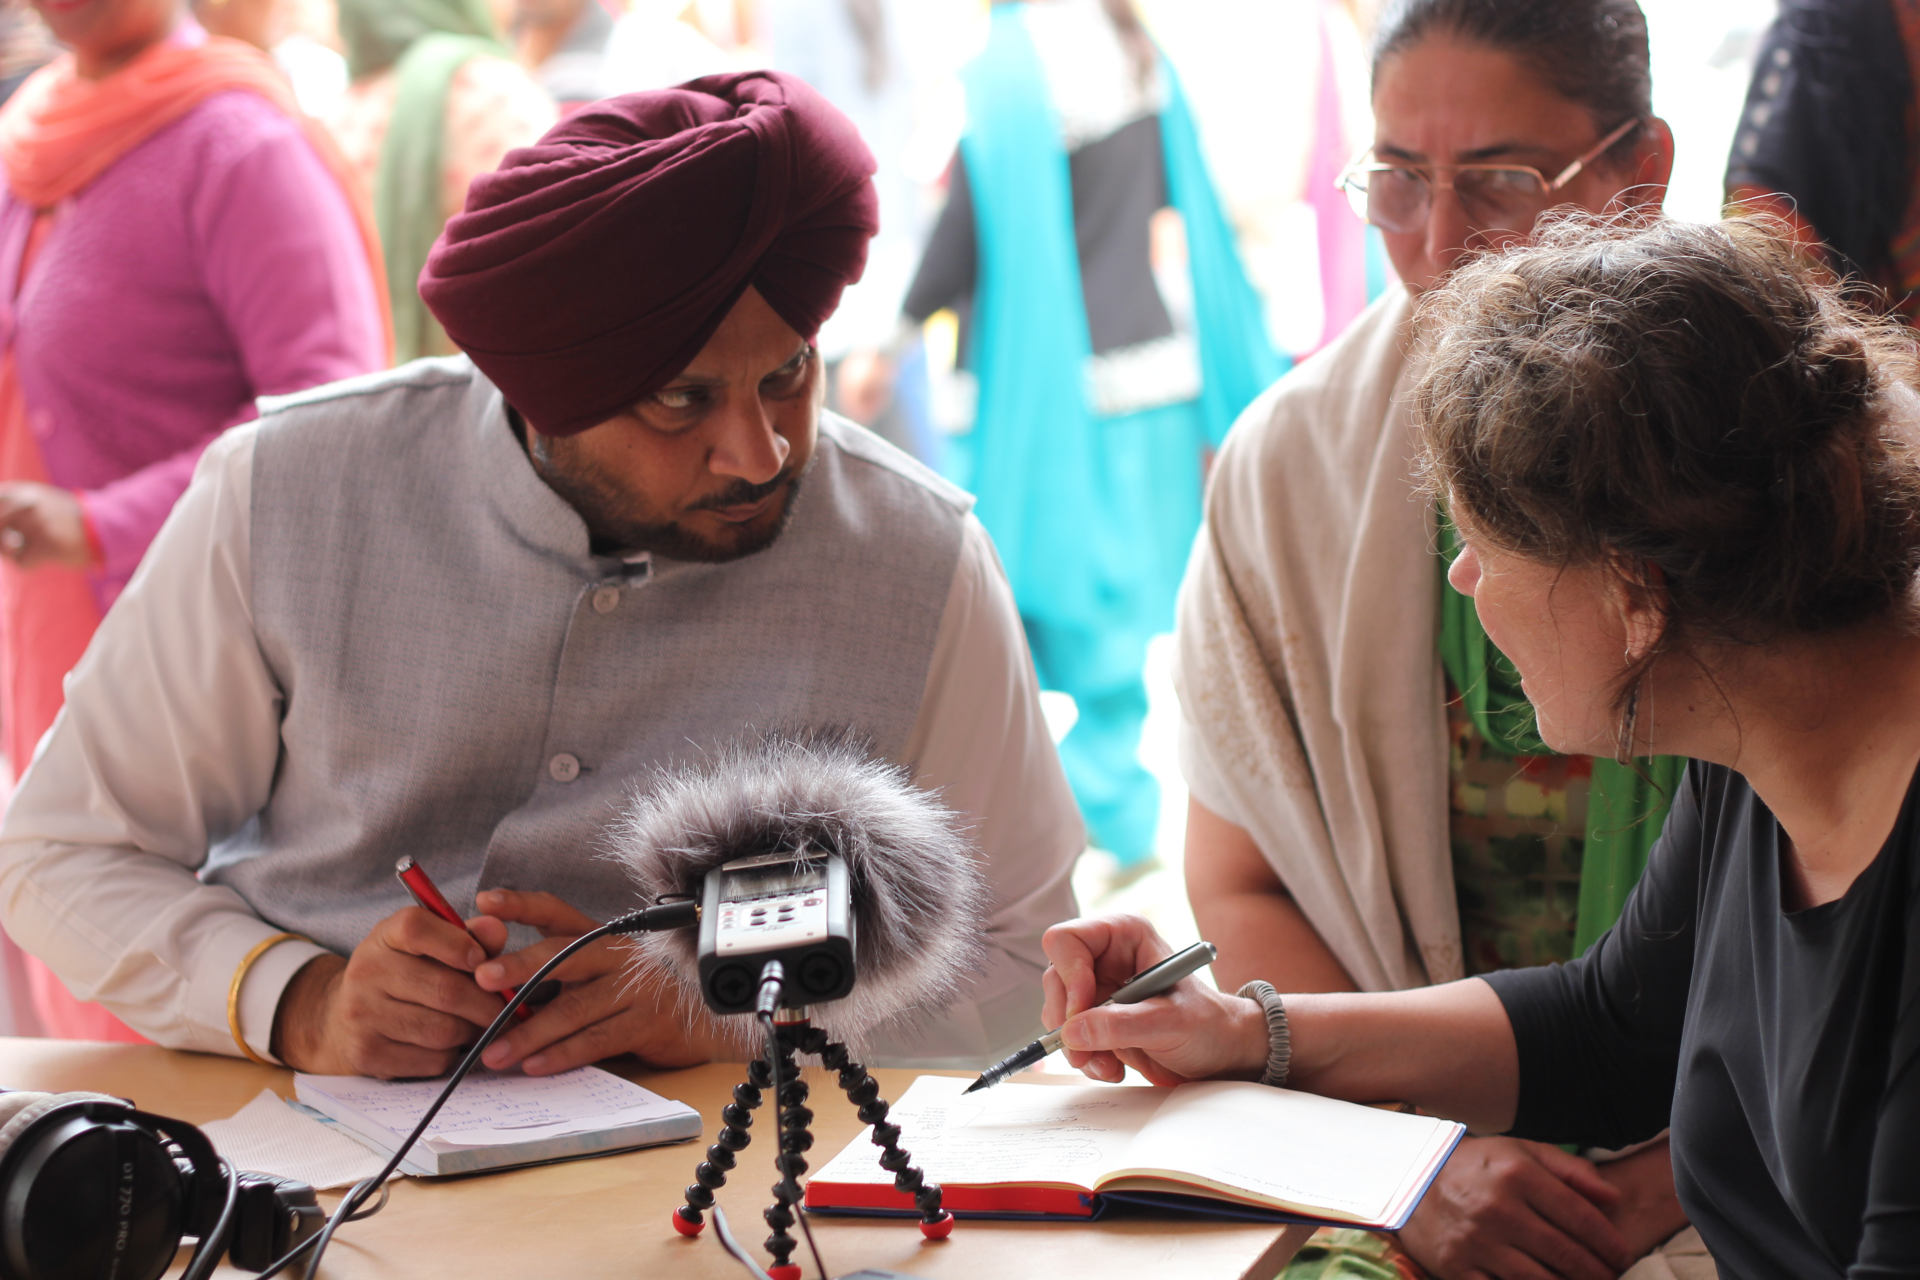 A man in a turban speaks to a female researcher during a podcast recording